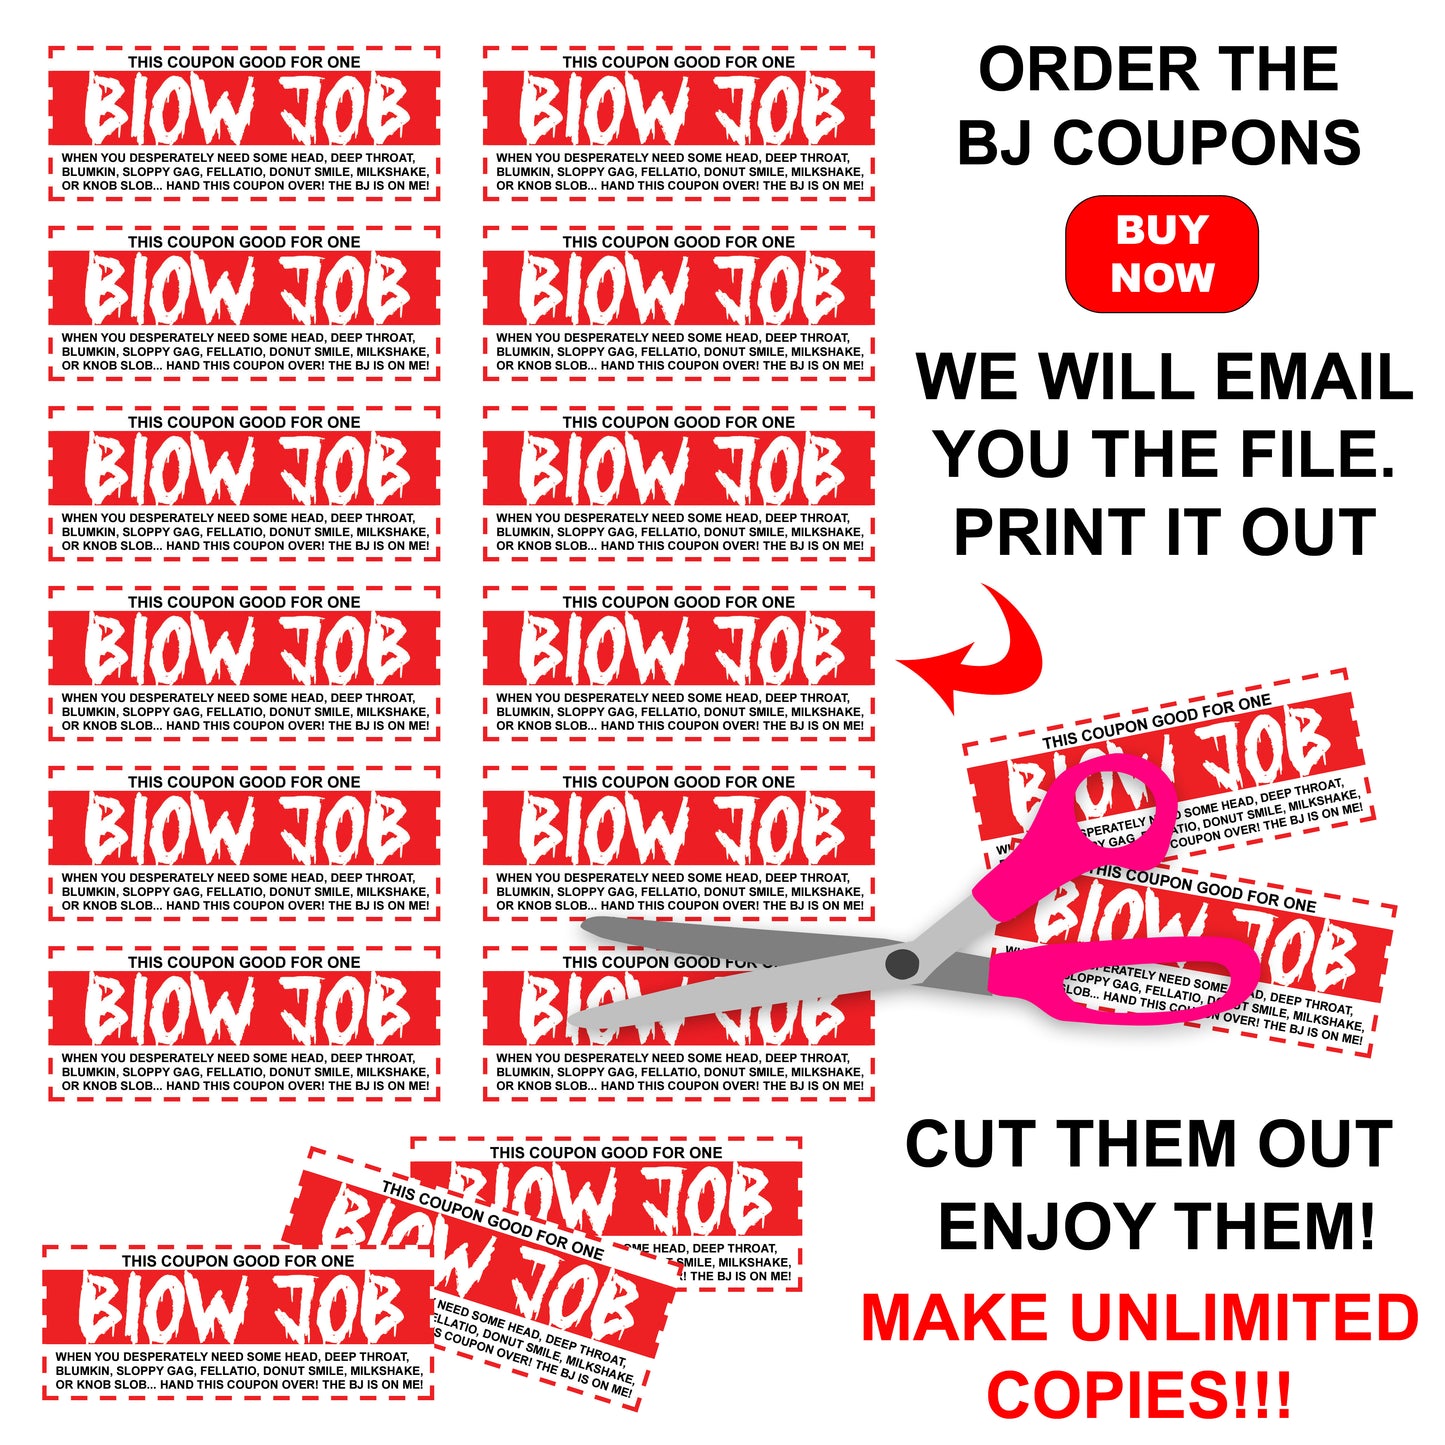 Blow Job Coupons for Him, Husband, Boyfriend, Romance - PDF File to Print and Use!